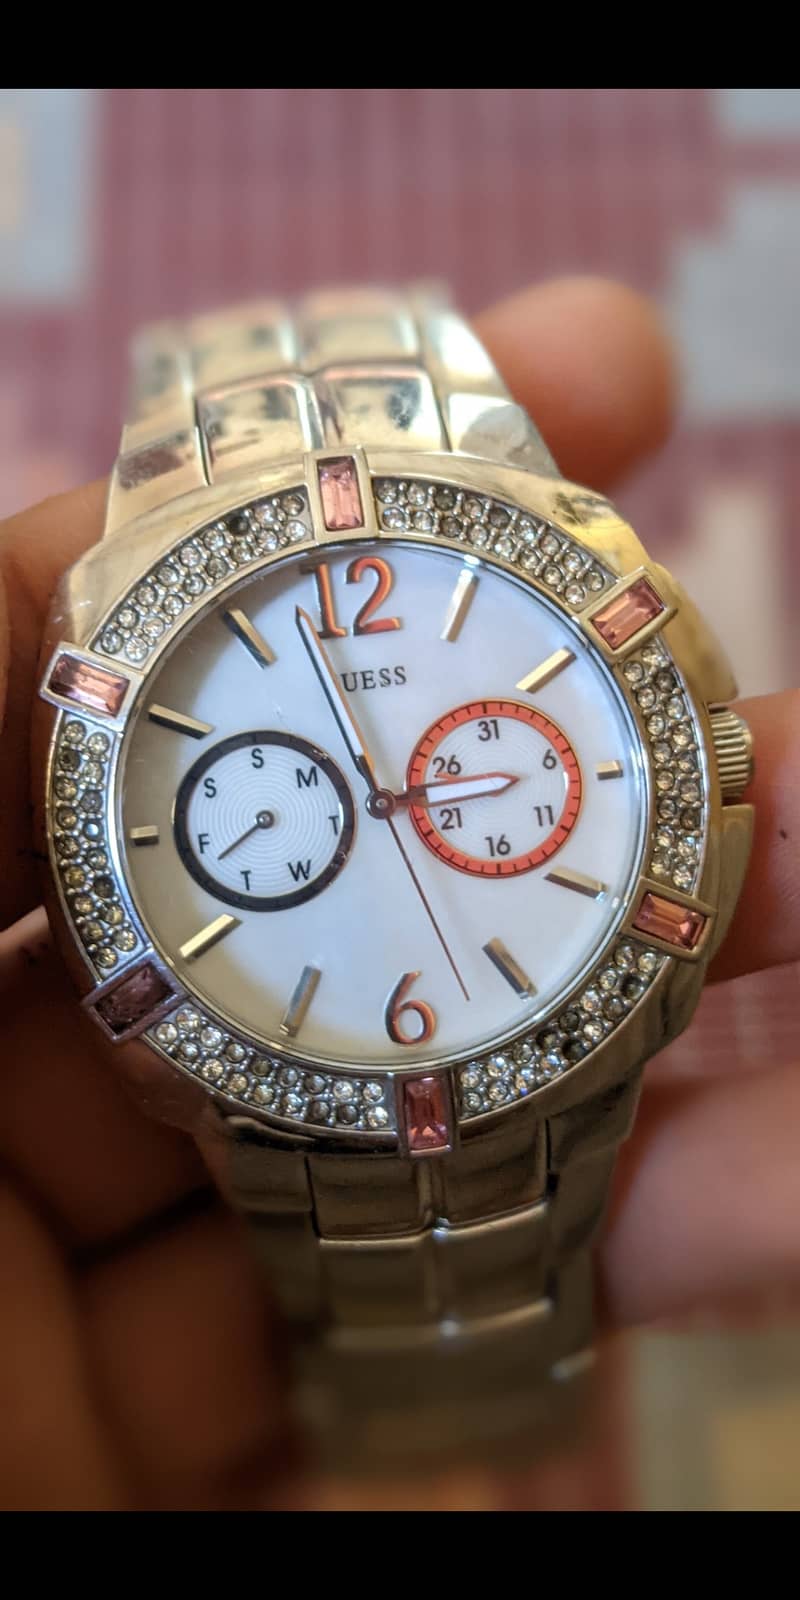 Guess Original Imported Watch 1